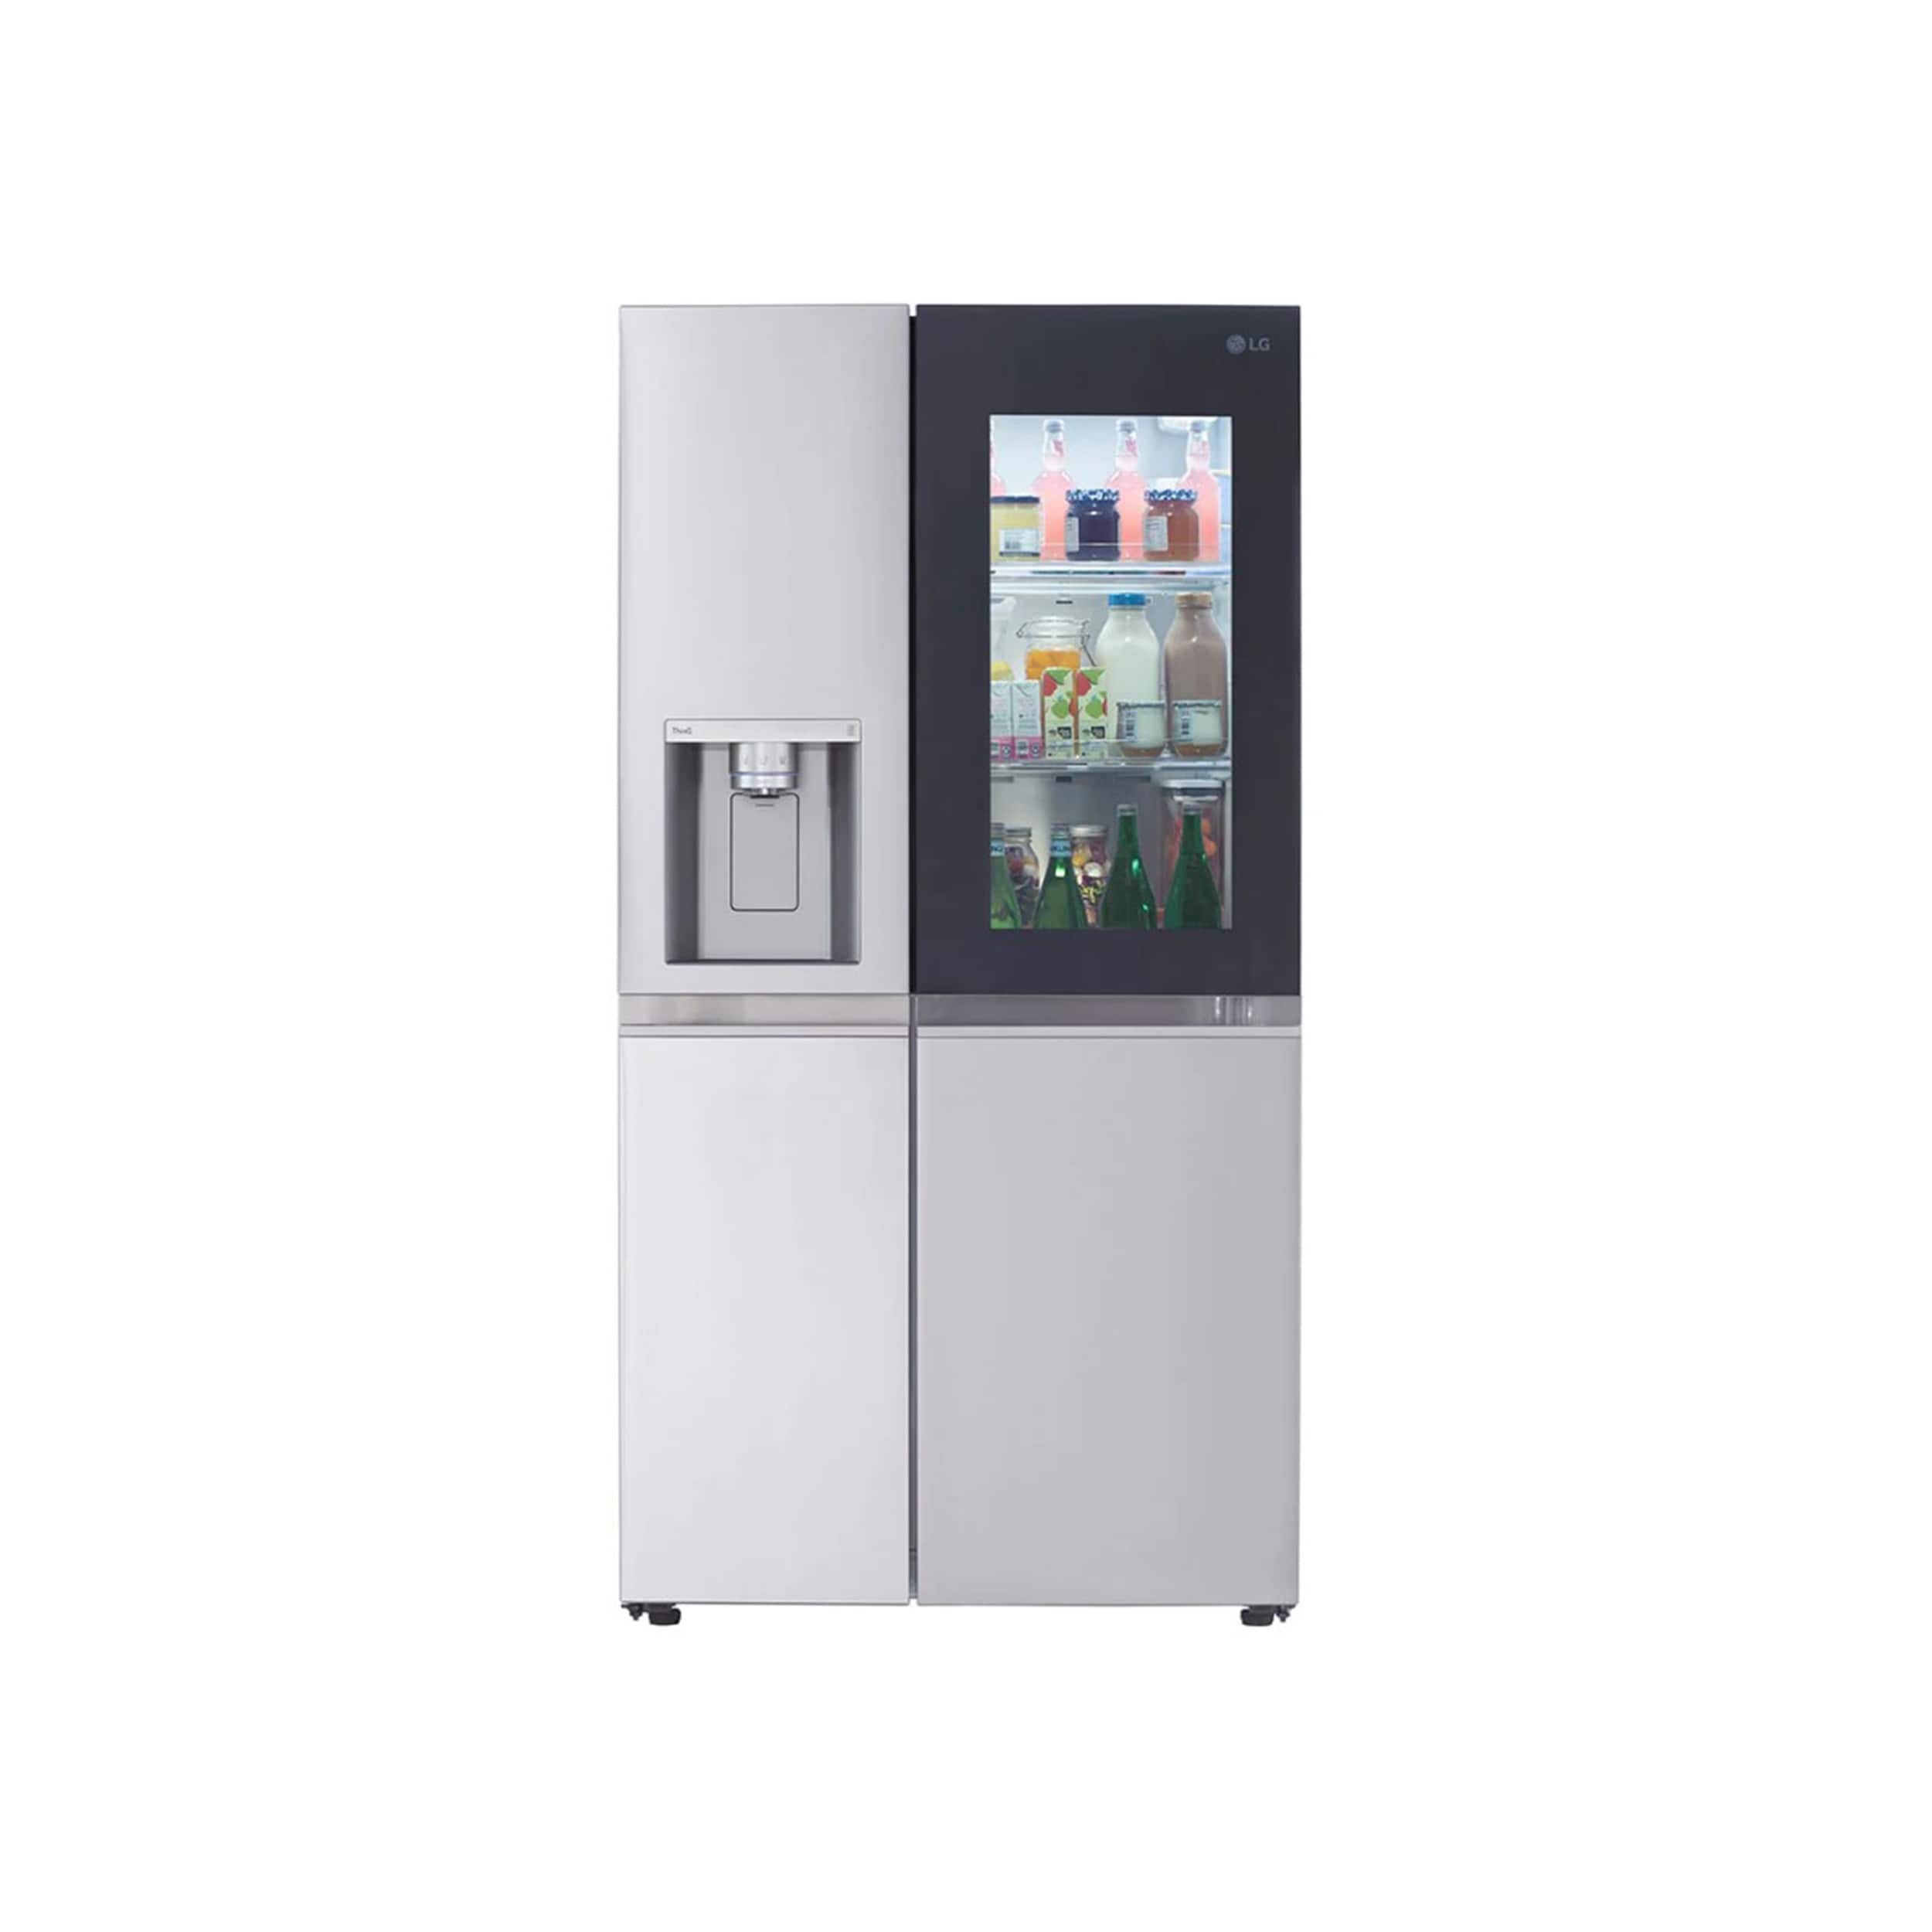 LG 27 cu. ft. Side-By-Side InstaView Refrigerator - Print Proof Stainless Steel